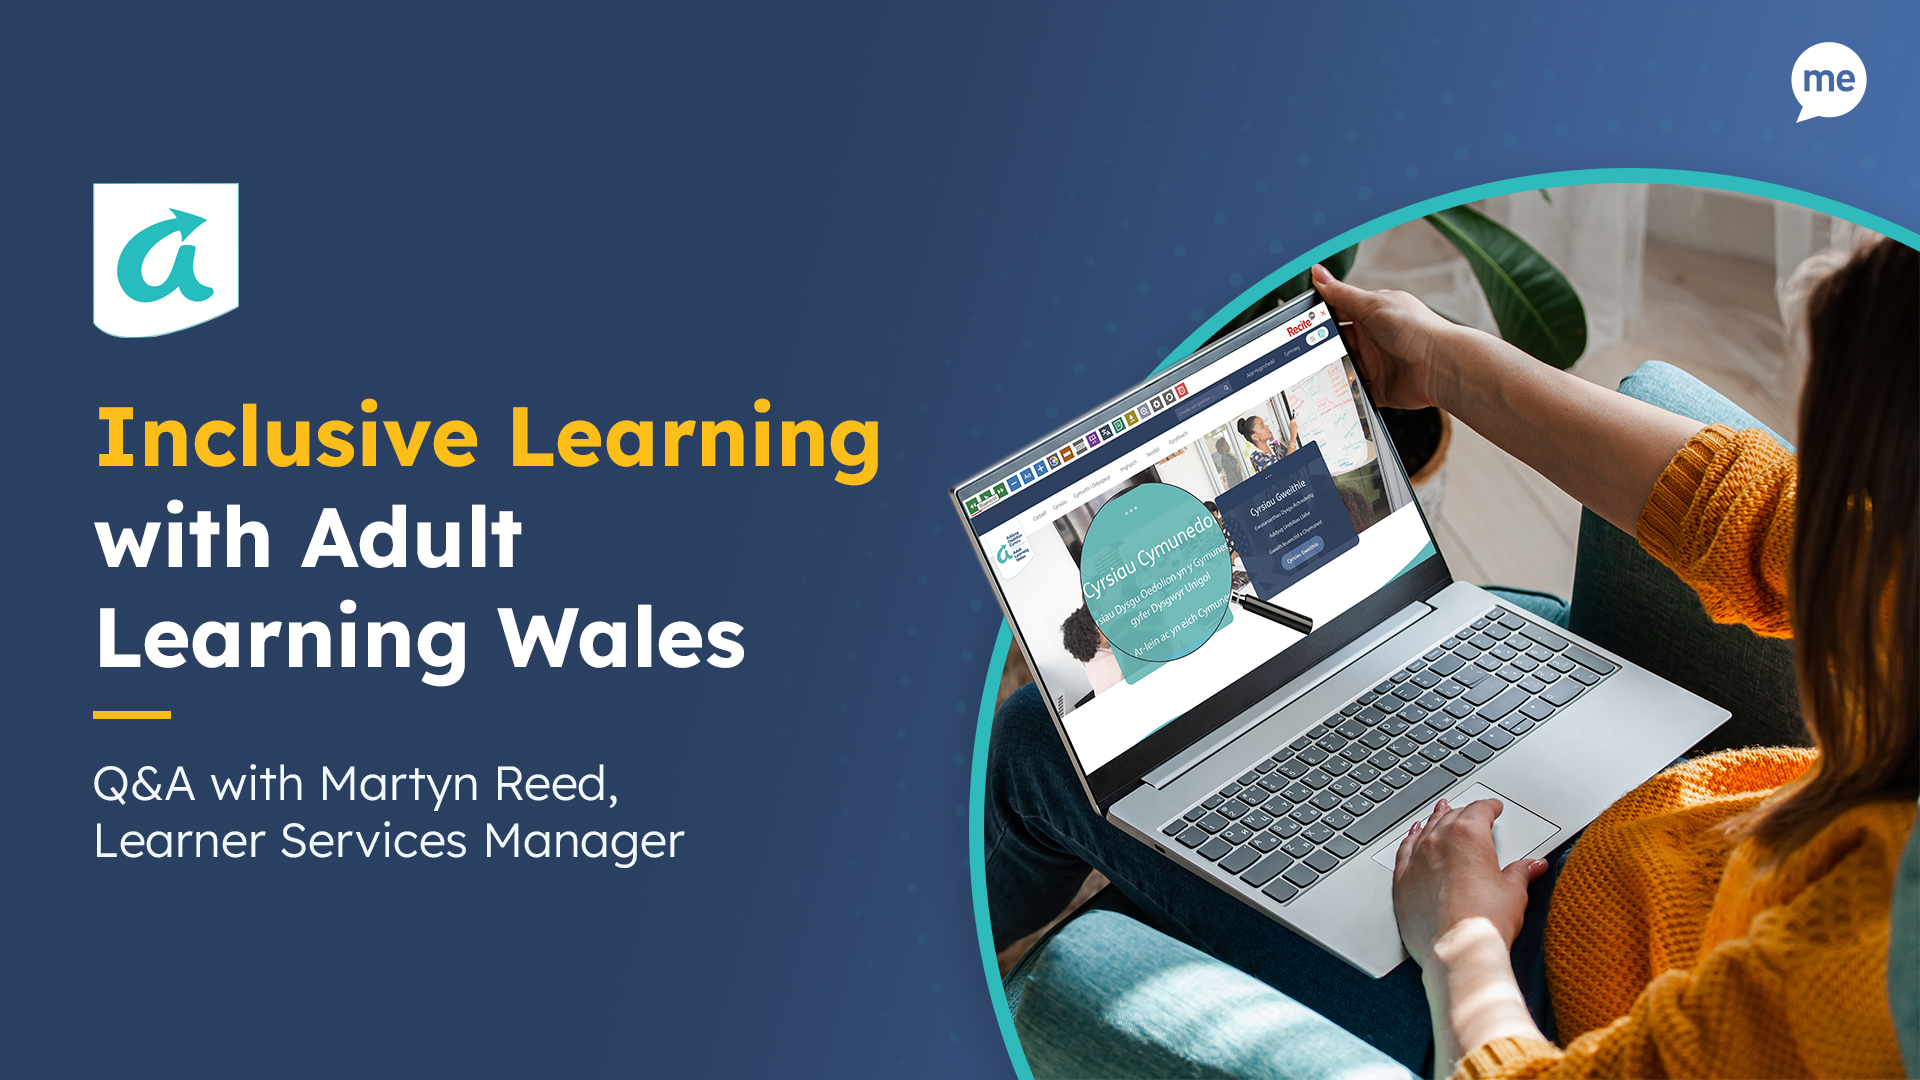 Inclusive Learning with Adult Learning Wales, Q&A with Martyn Reed, Learner Services Manager